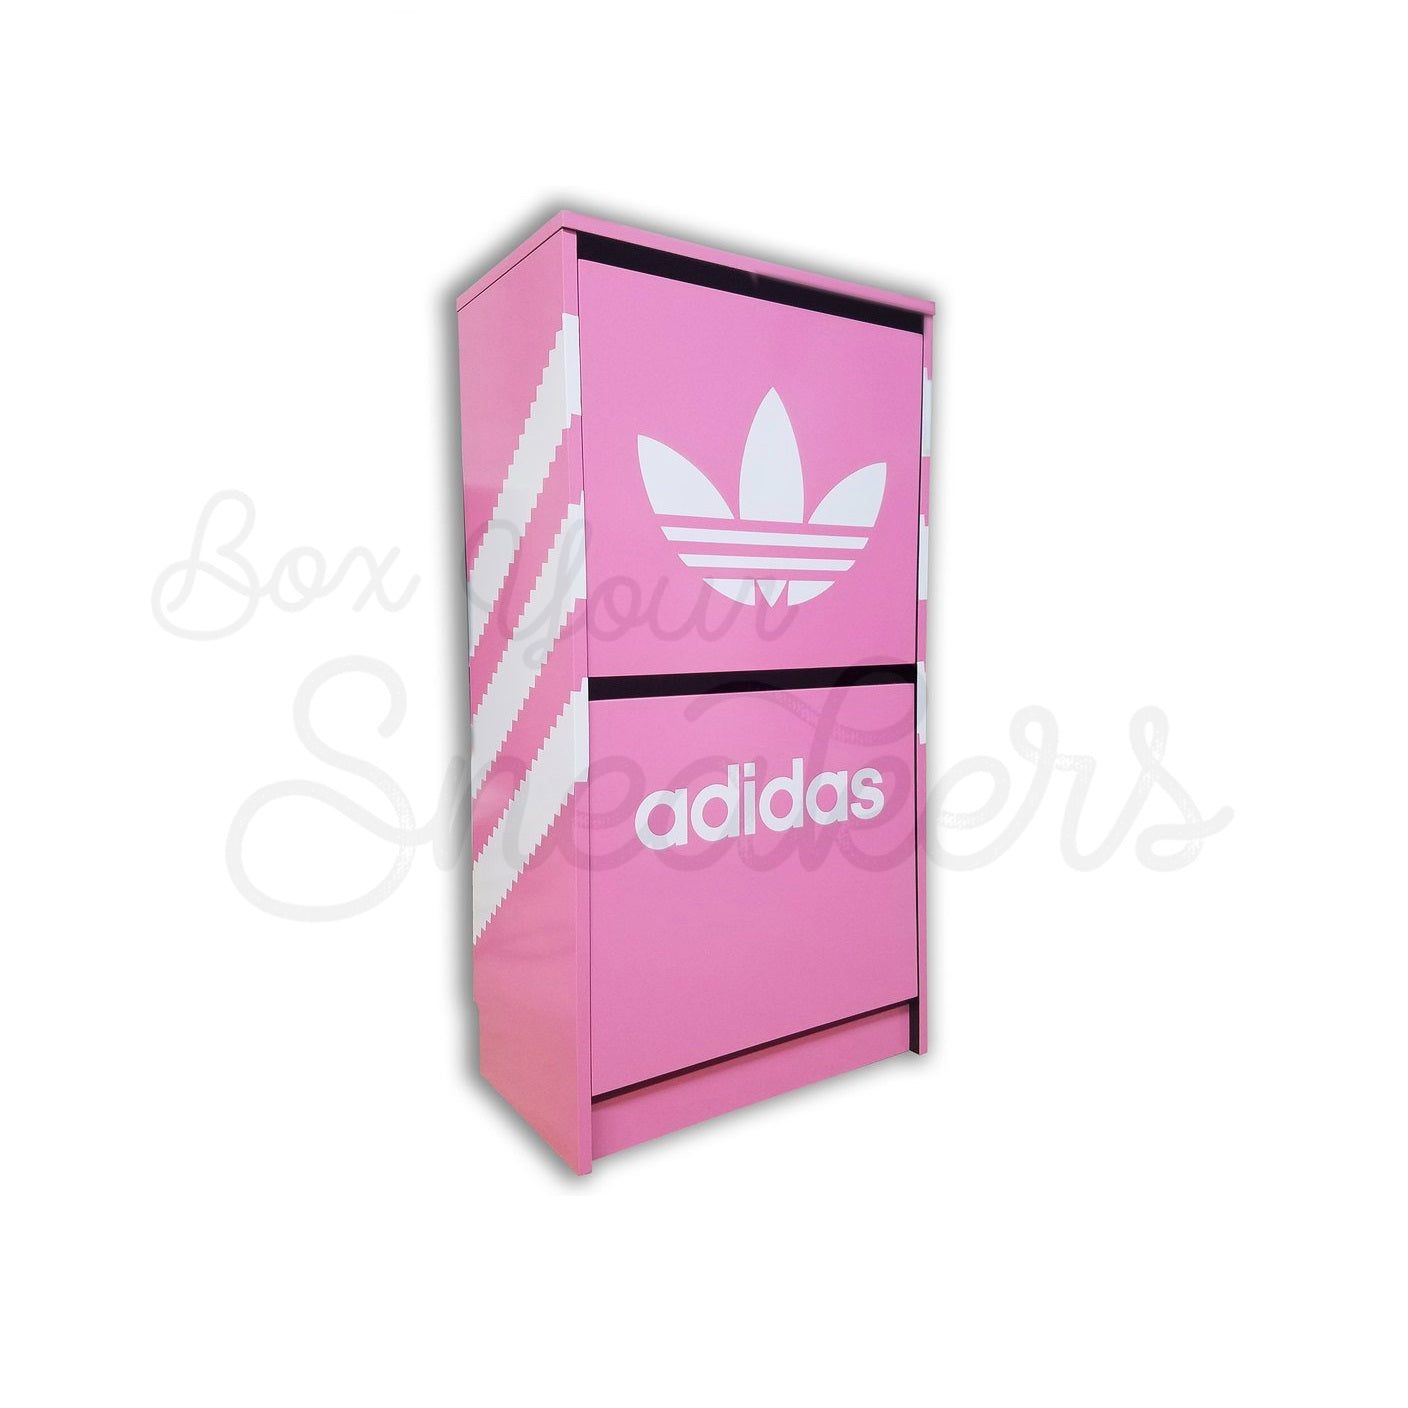 giant adidas shoe box for sale